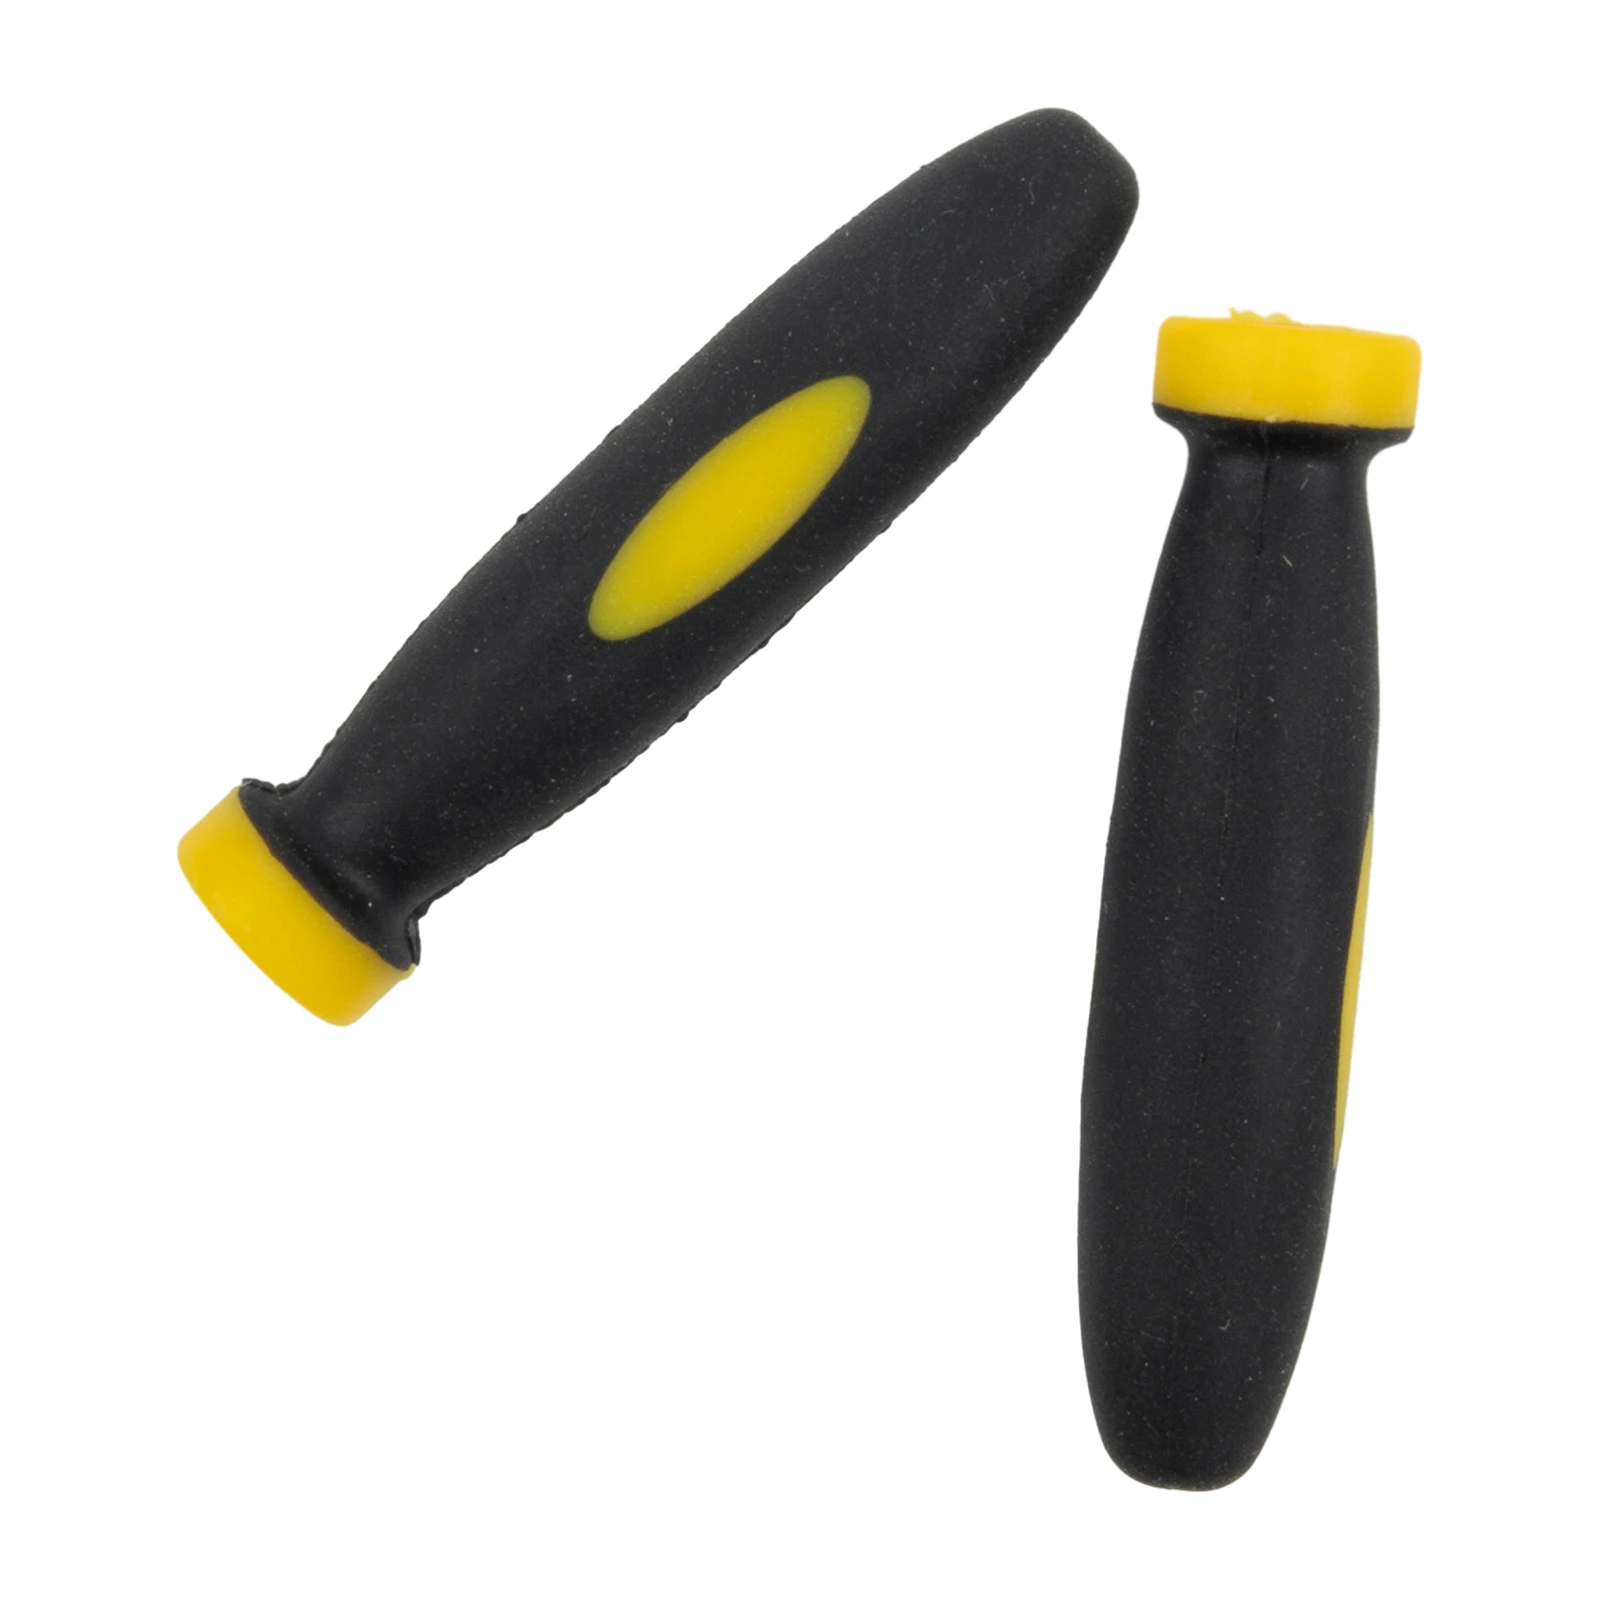 

10pcs/set Rubber Files Handles 2.36Inch 3mm Hole Diameter Quickly Installed Handle Files Supplies Rubber Files Handles Hand Tool